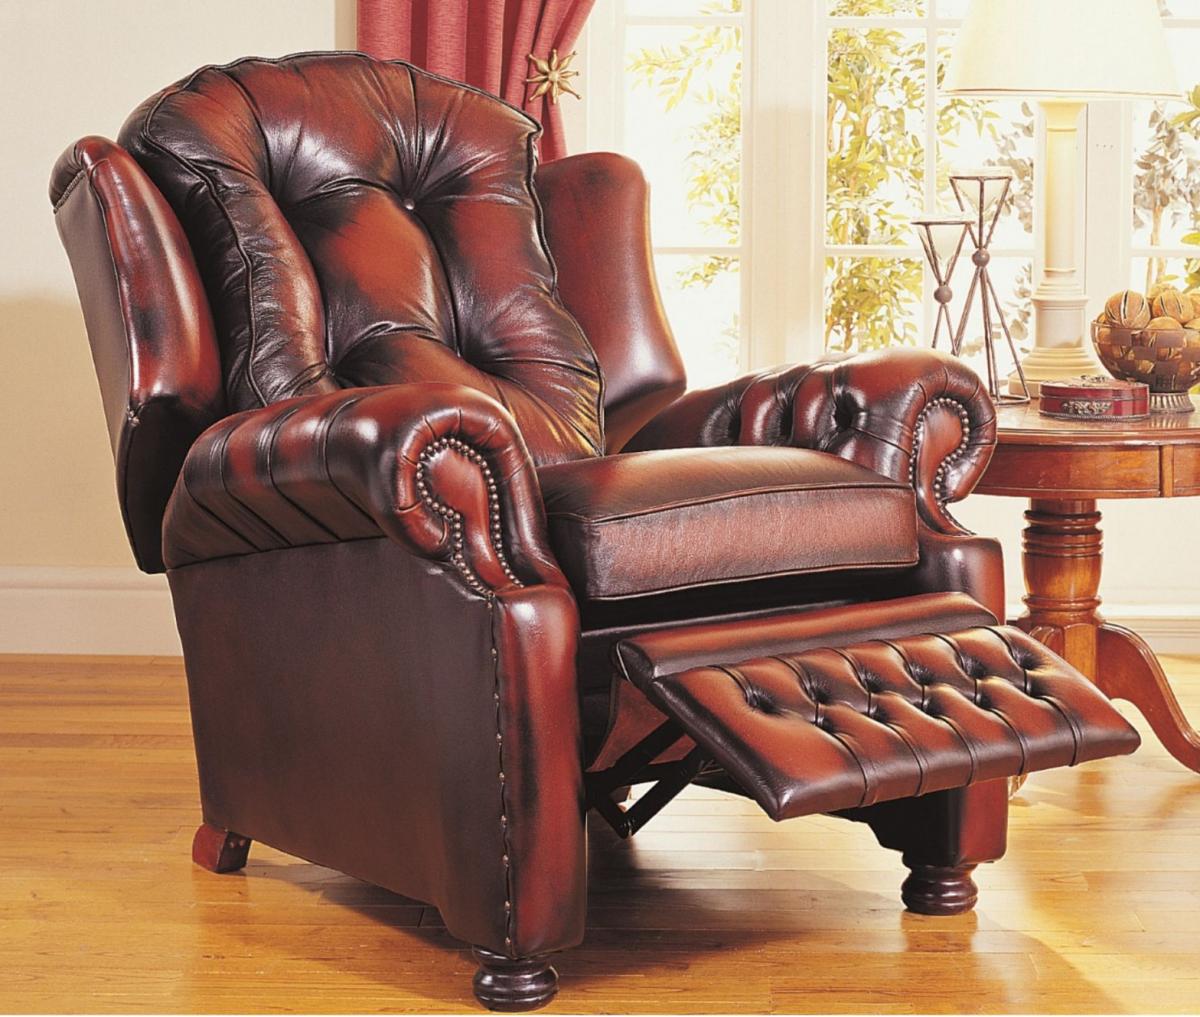 Chesterfield Recliner "Taylor Recliner" 